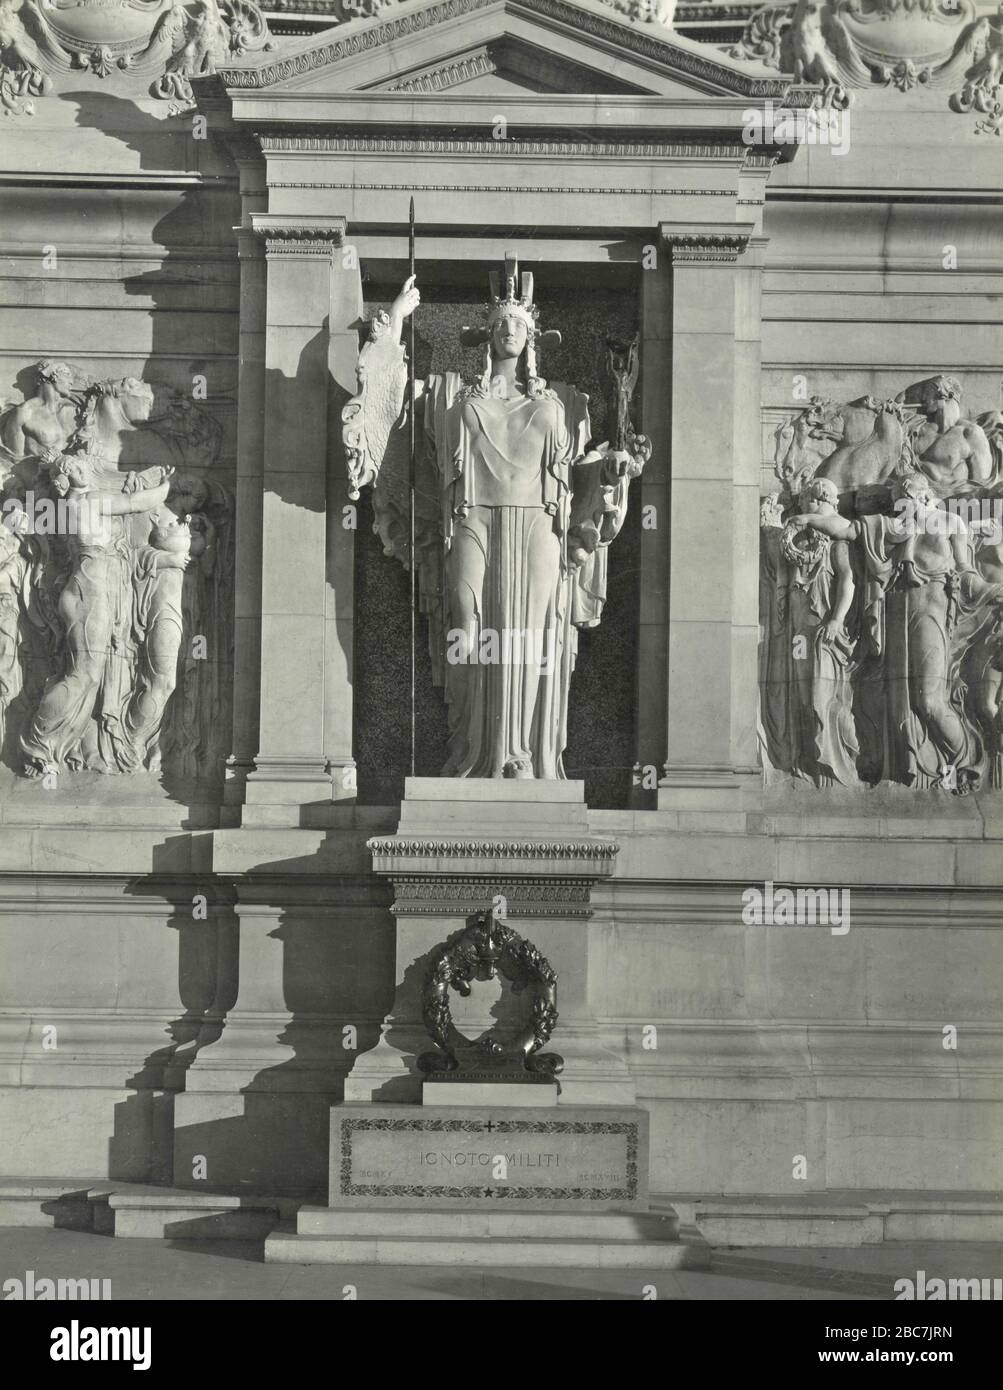 Memorial to Victor Emmanuel, Tomb of the Unknown Soldier, detail, Rome, Italy 1920s Stock Photo